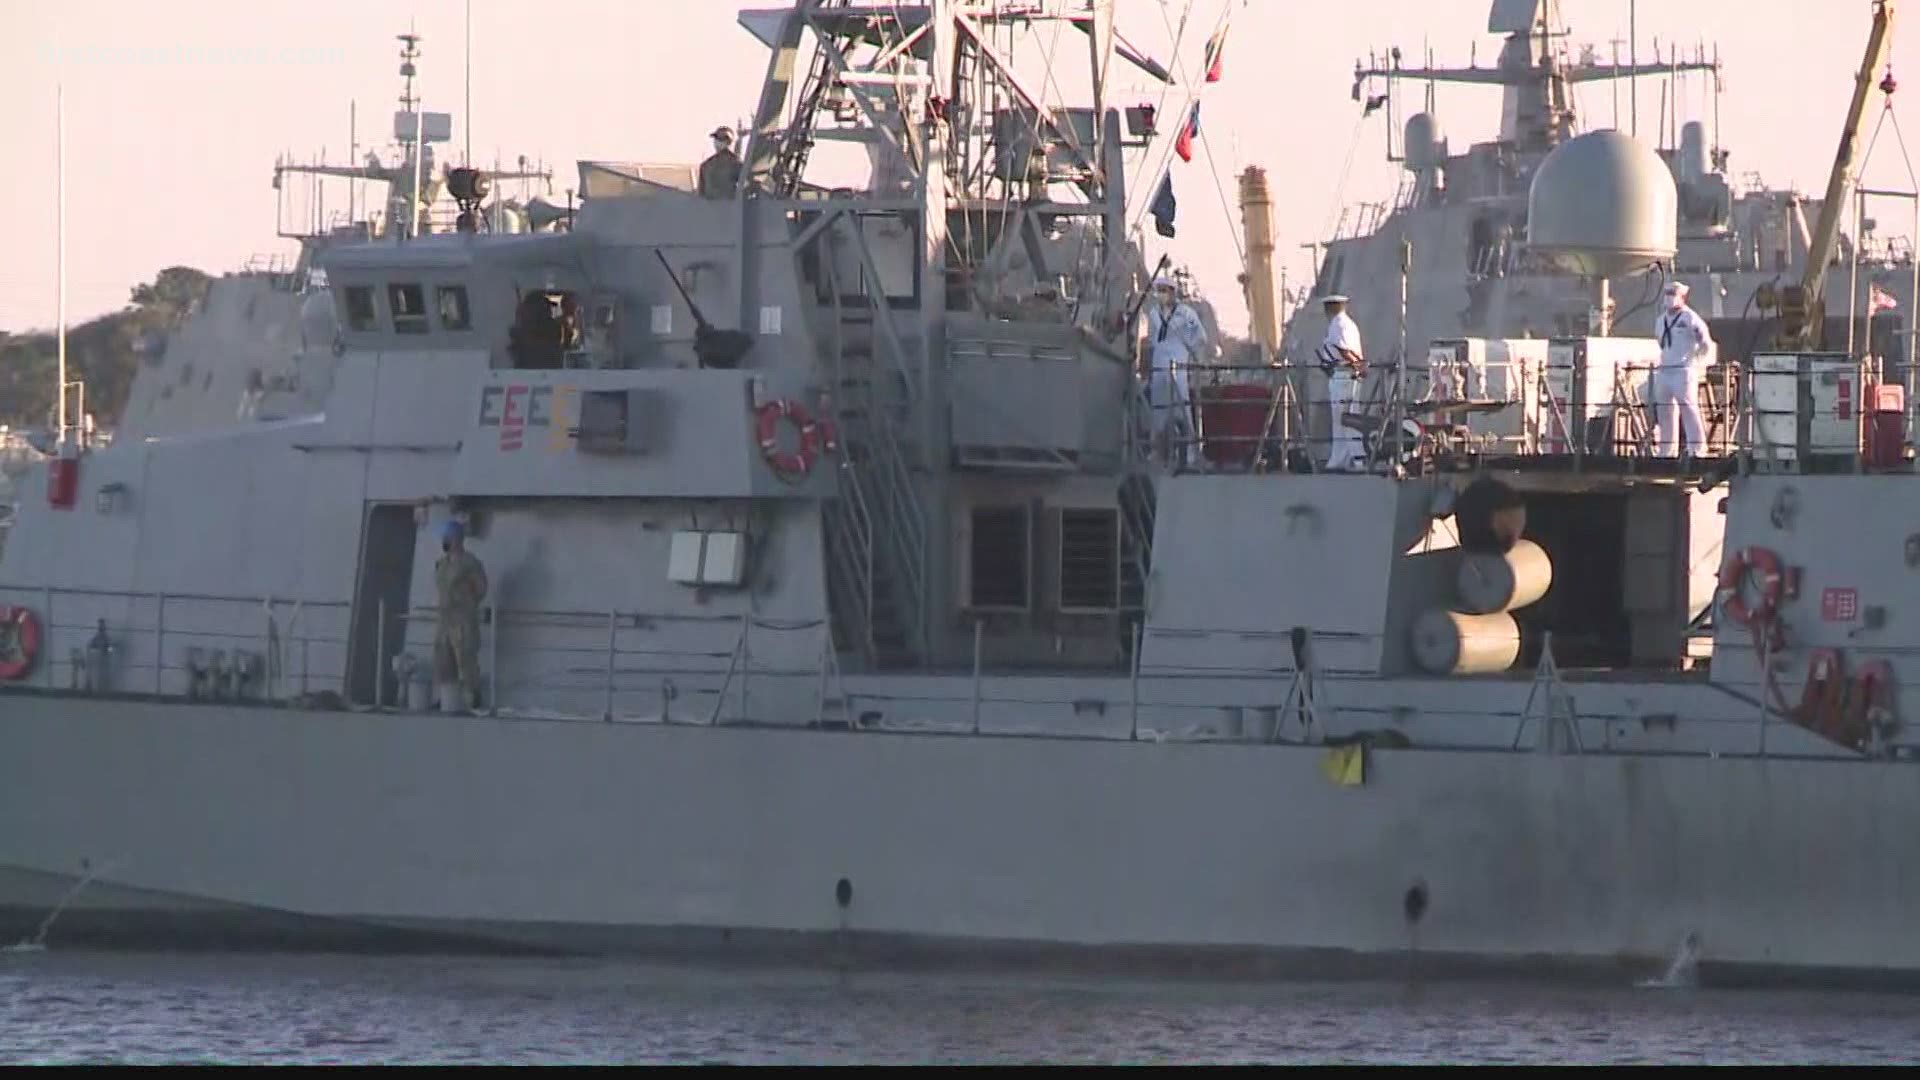 This was the first time all three of Naval Station Mayport's coastal patrol ships were deployed at the same time.